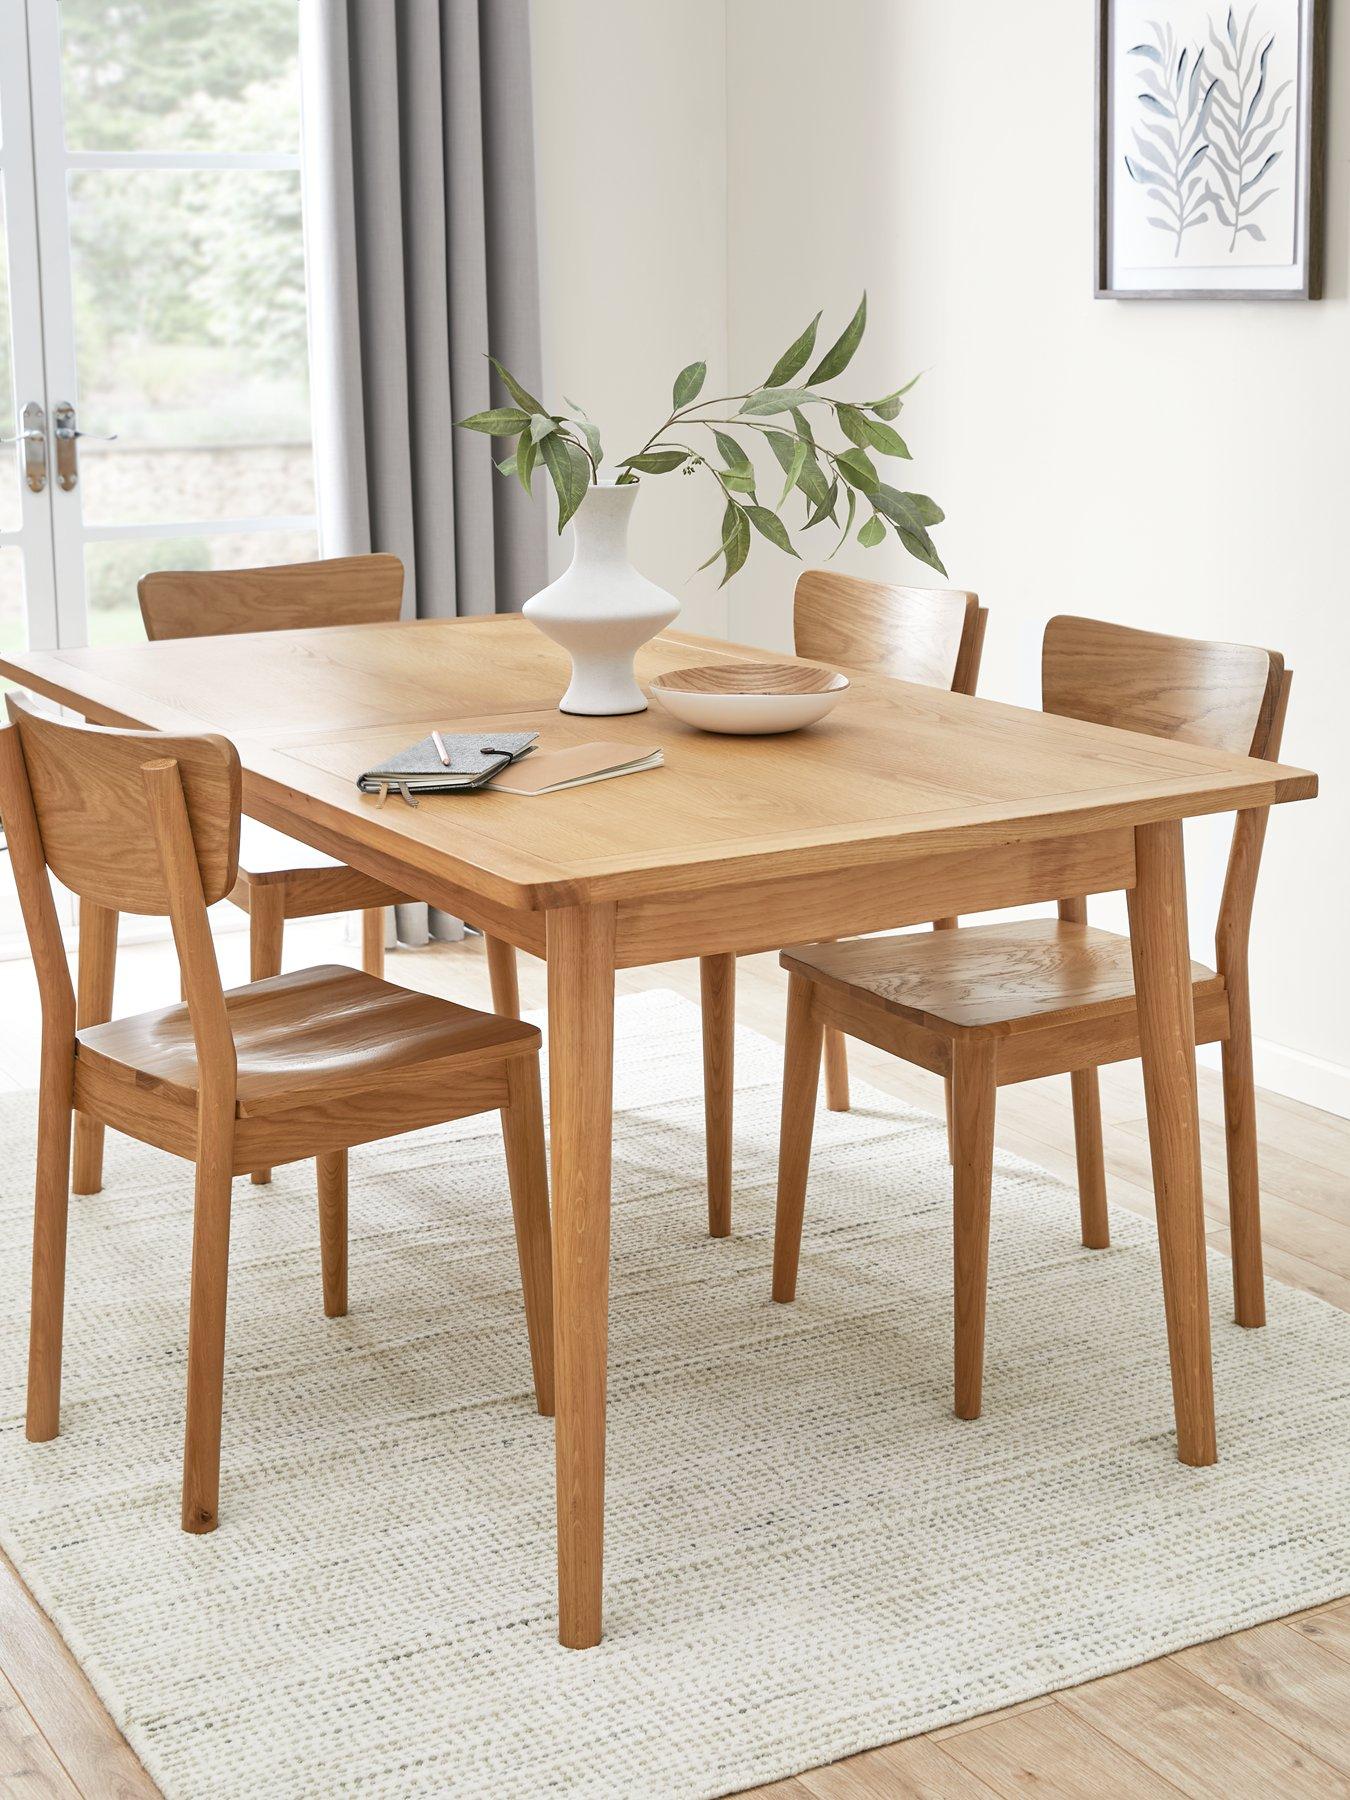 Very Home Sumati 160 - 210 Cm Dining Extending Table + 4 Chairs